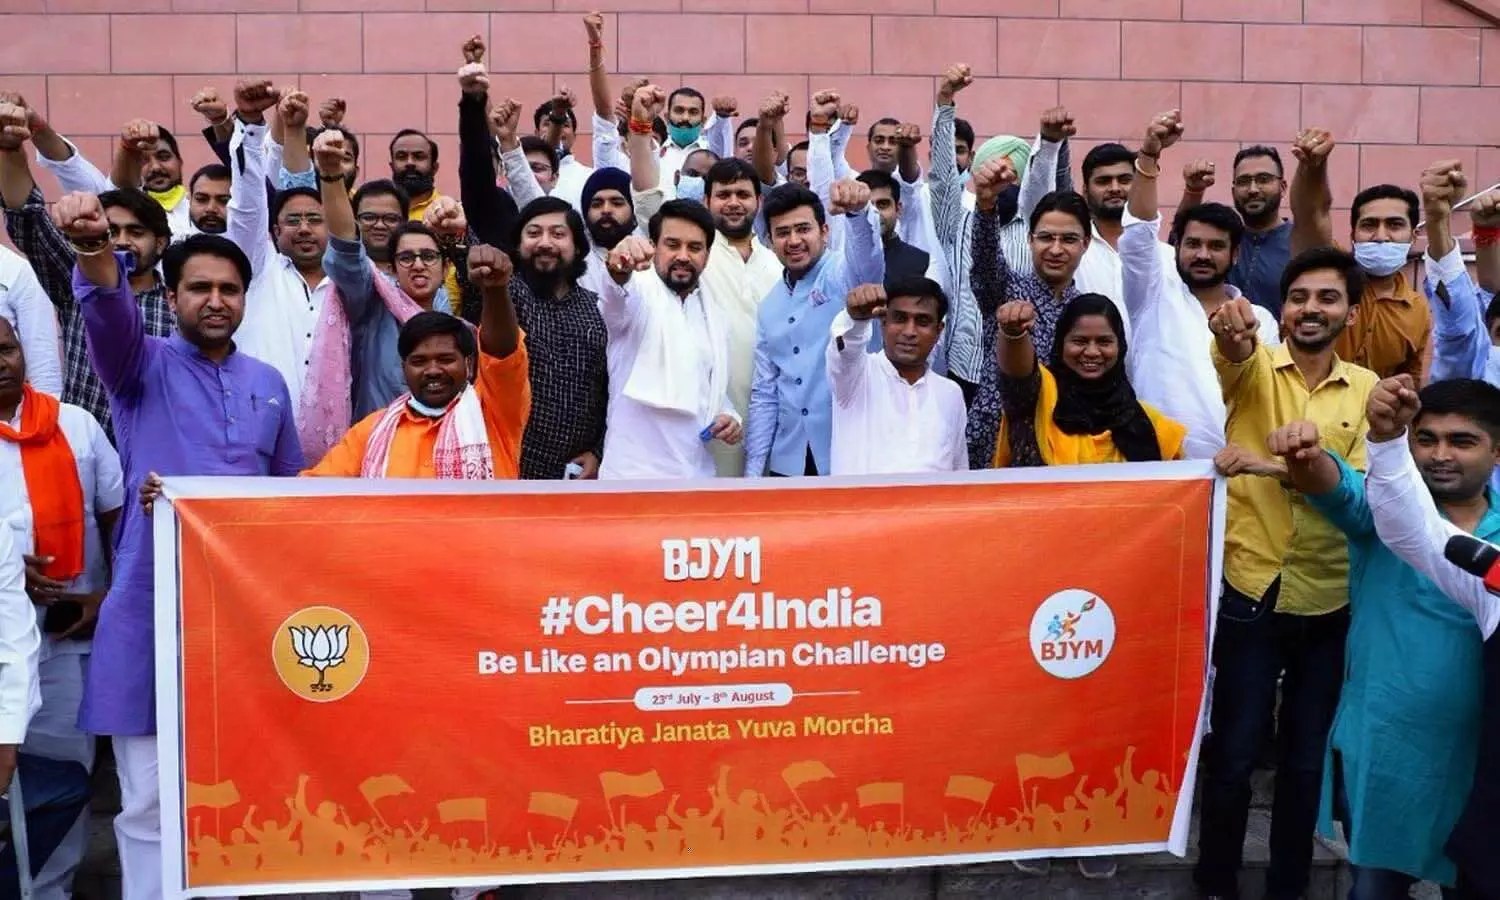 Bharatiya Janata Yuva Morcha will work to encourage youth to become disciplined and strong like athletes by running #Cheer4india campaign.